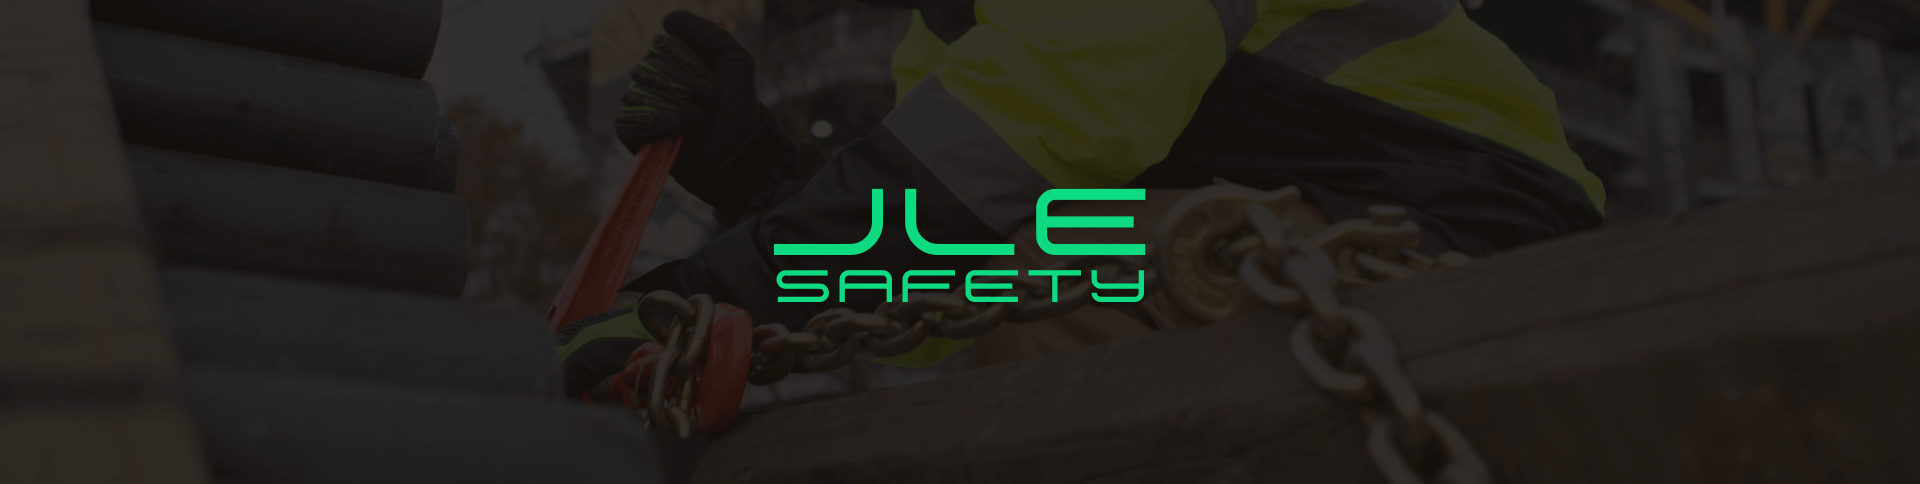 Photo of load being secured on a flatbed trailer with the words JLE Safety overlayed on top